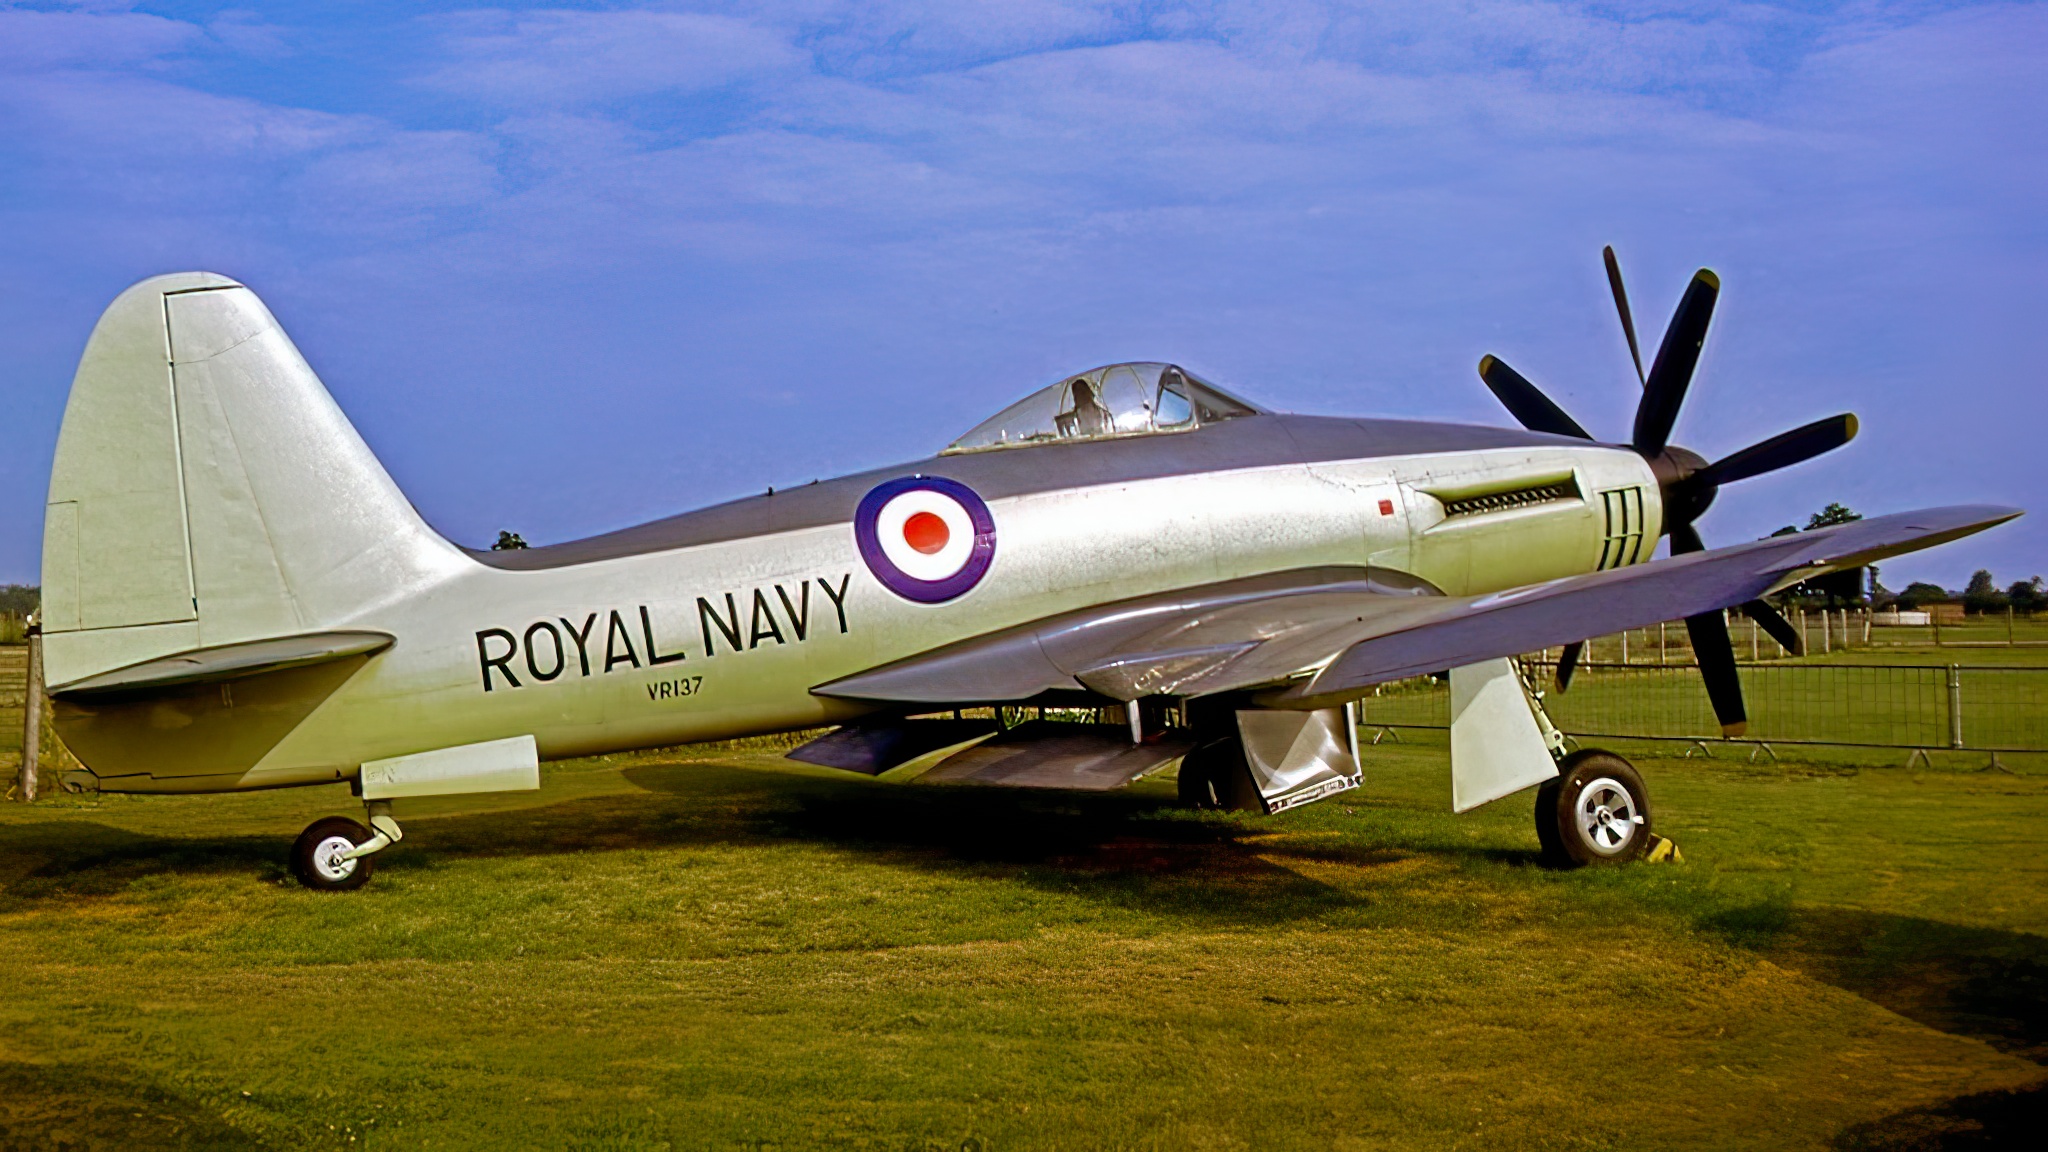 The last remaining Wyvern, a TF.1, exhibited outdoors at the Fleet Air Arm Museum at RNAS Yeovilton in 1971